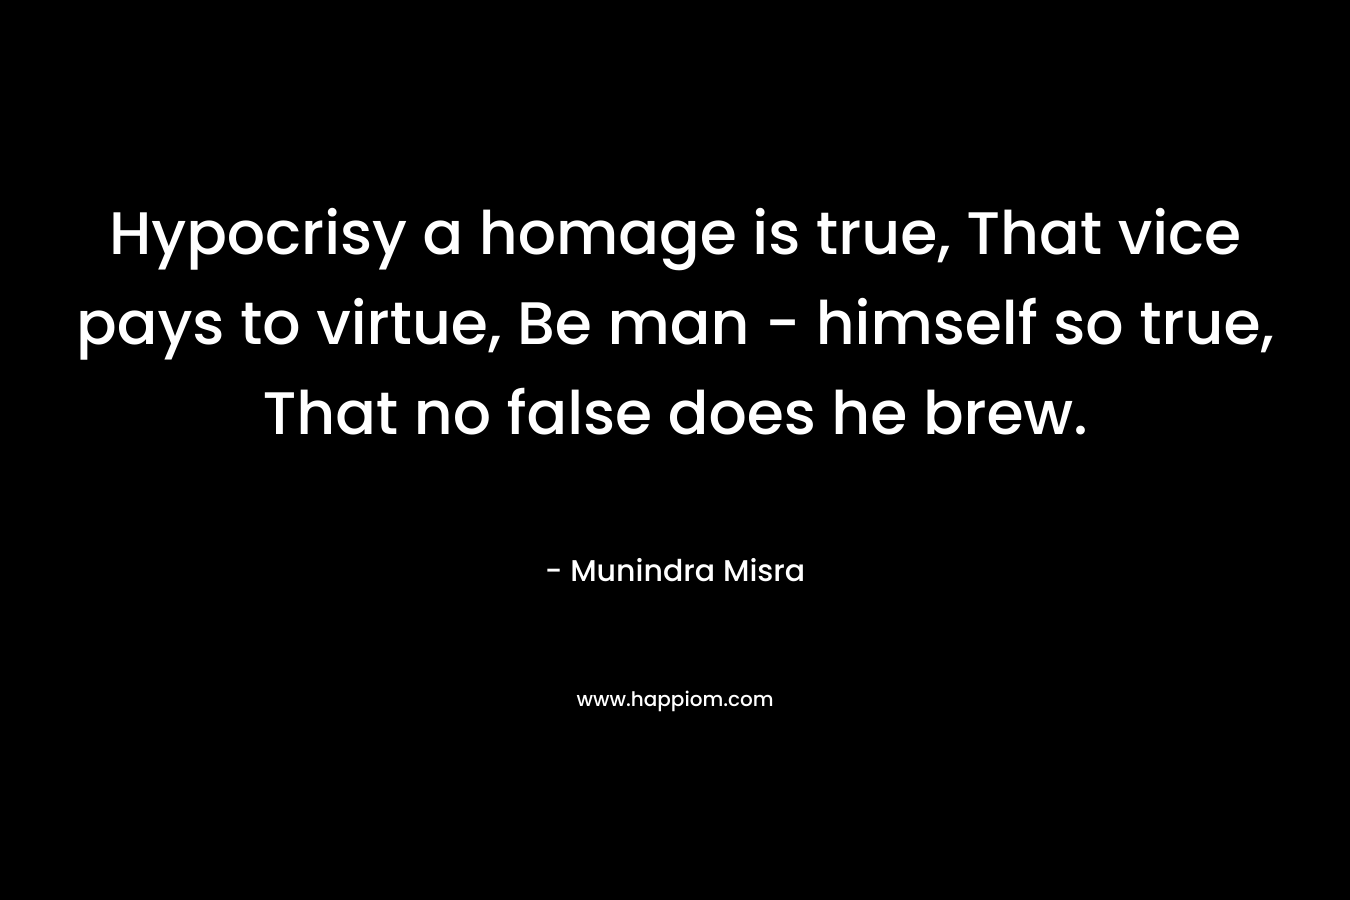 Hypocrisy a homage is true, That vice pays to virtue, Be man - himself so true, That no false does he brew.